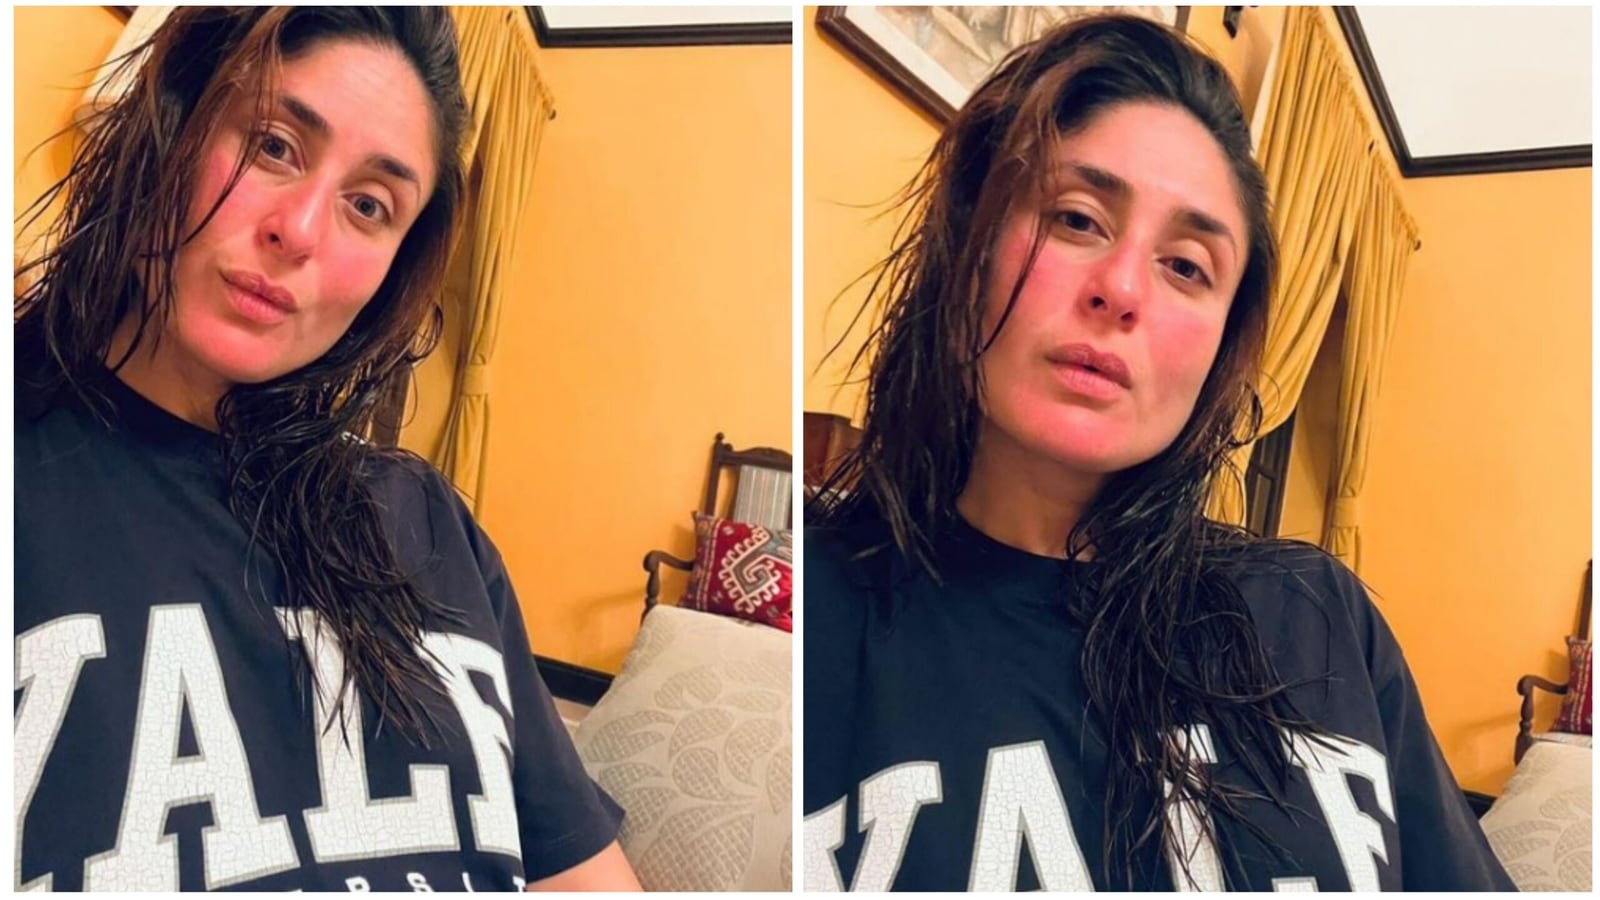 Kareena Kapoor drops some ‘Wednesday Knowledge’ as she shares selfies in Yale College T-shirt. See pics